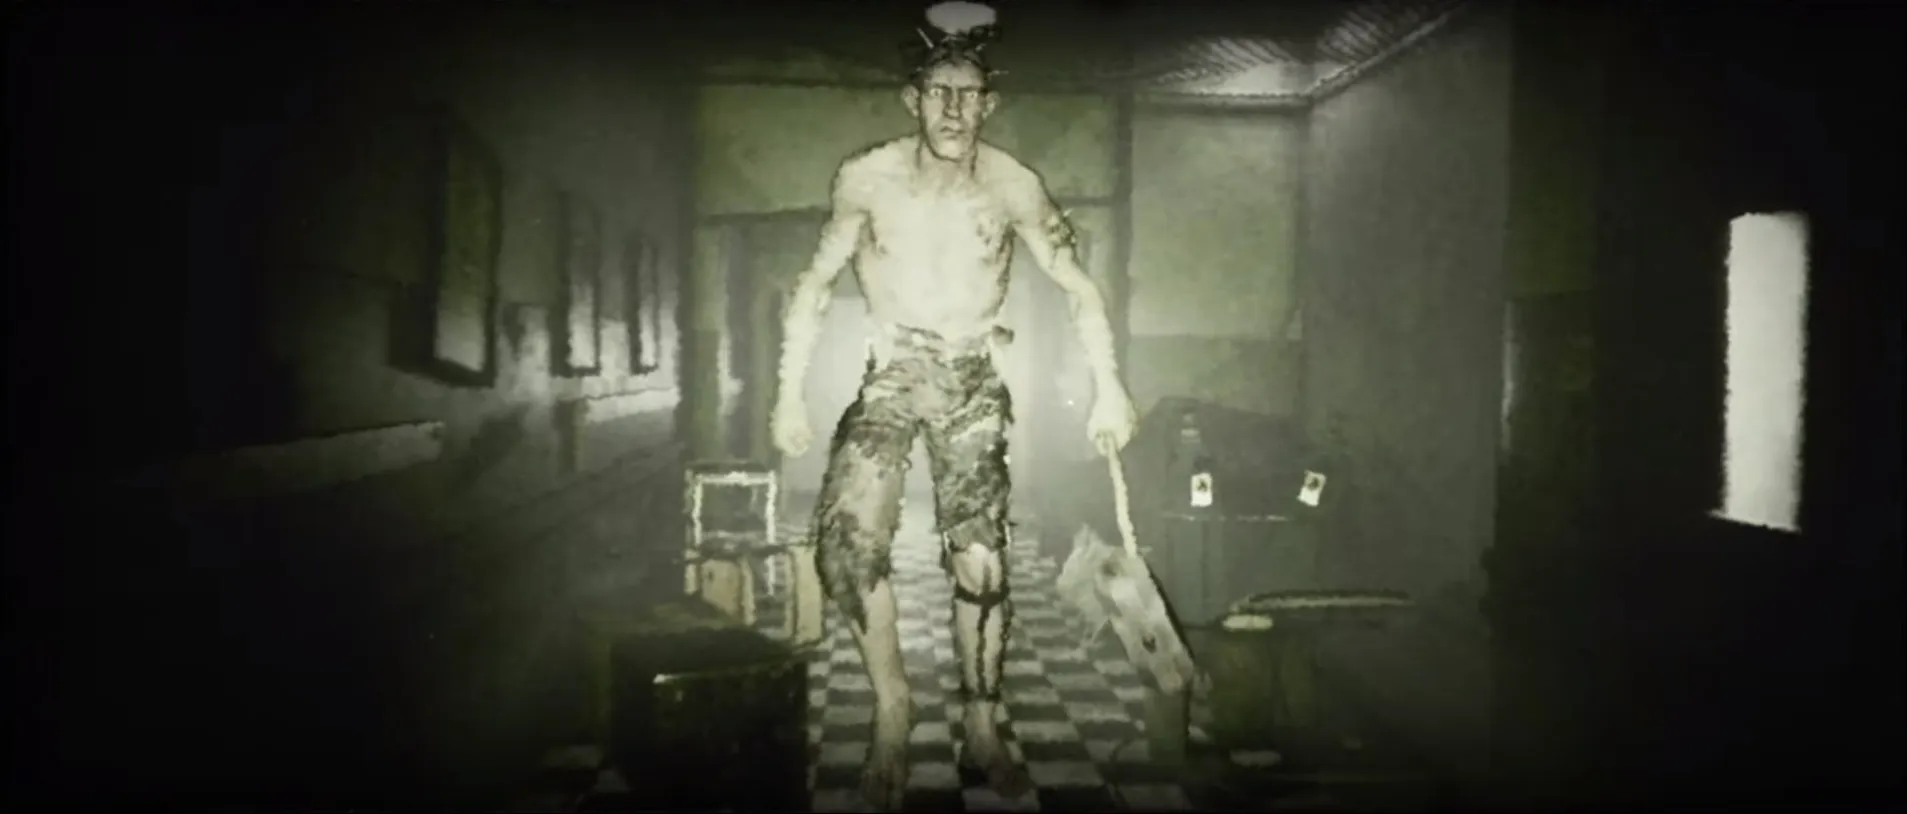 The Outlast Trials' opening moments are beyond terrifying, but it loses  steam fast in multiplayer